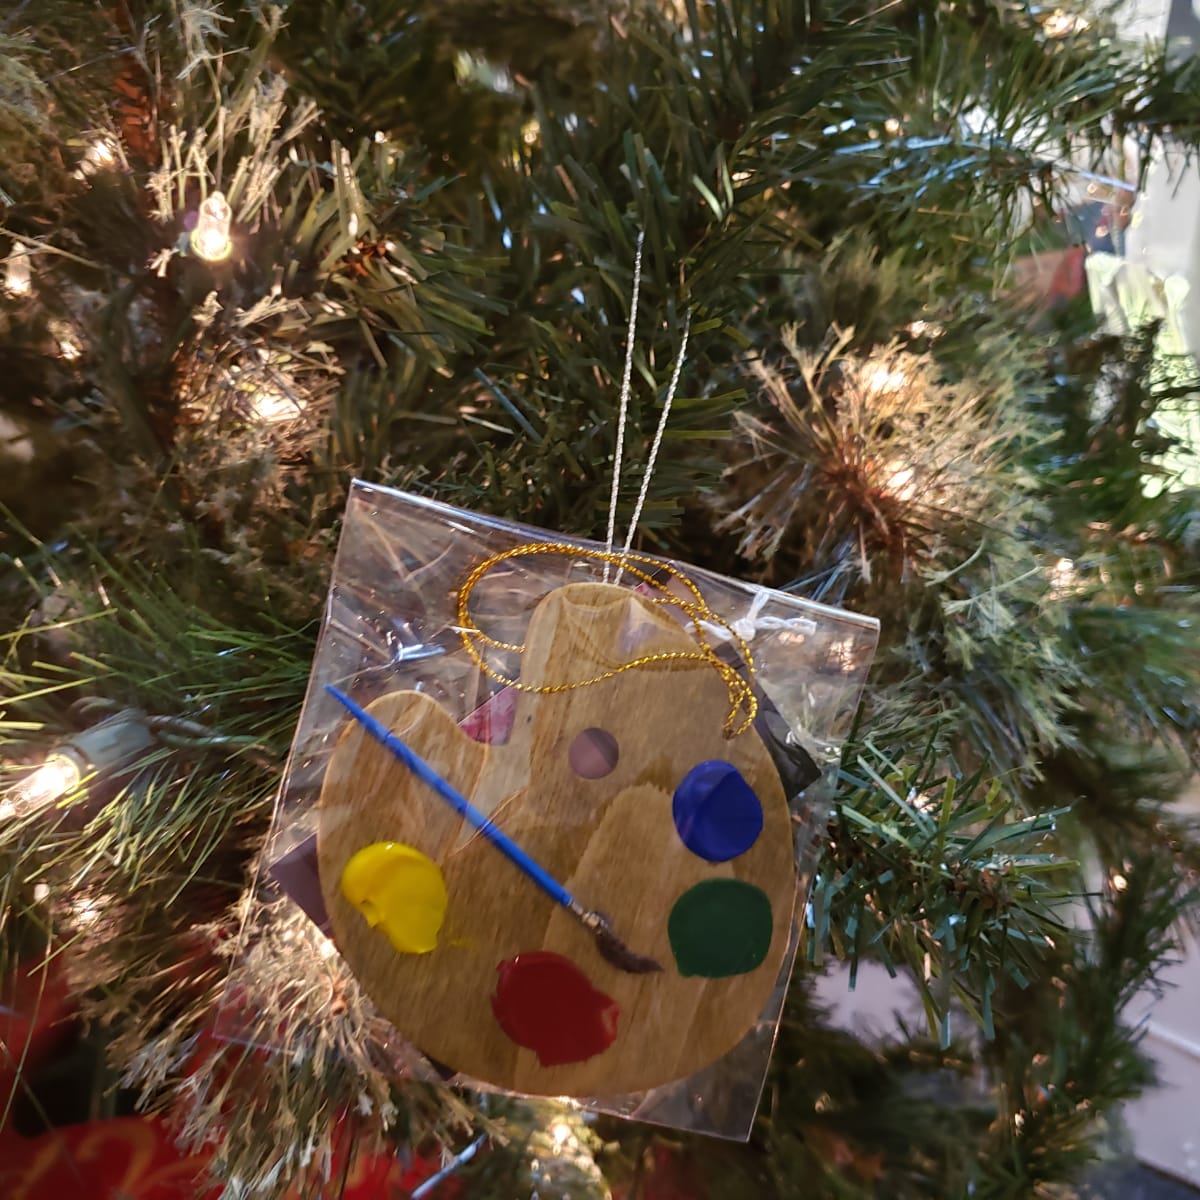 Limited Edition Handcrafted Ornament by Heather Medrano 